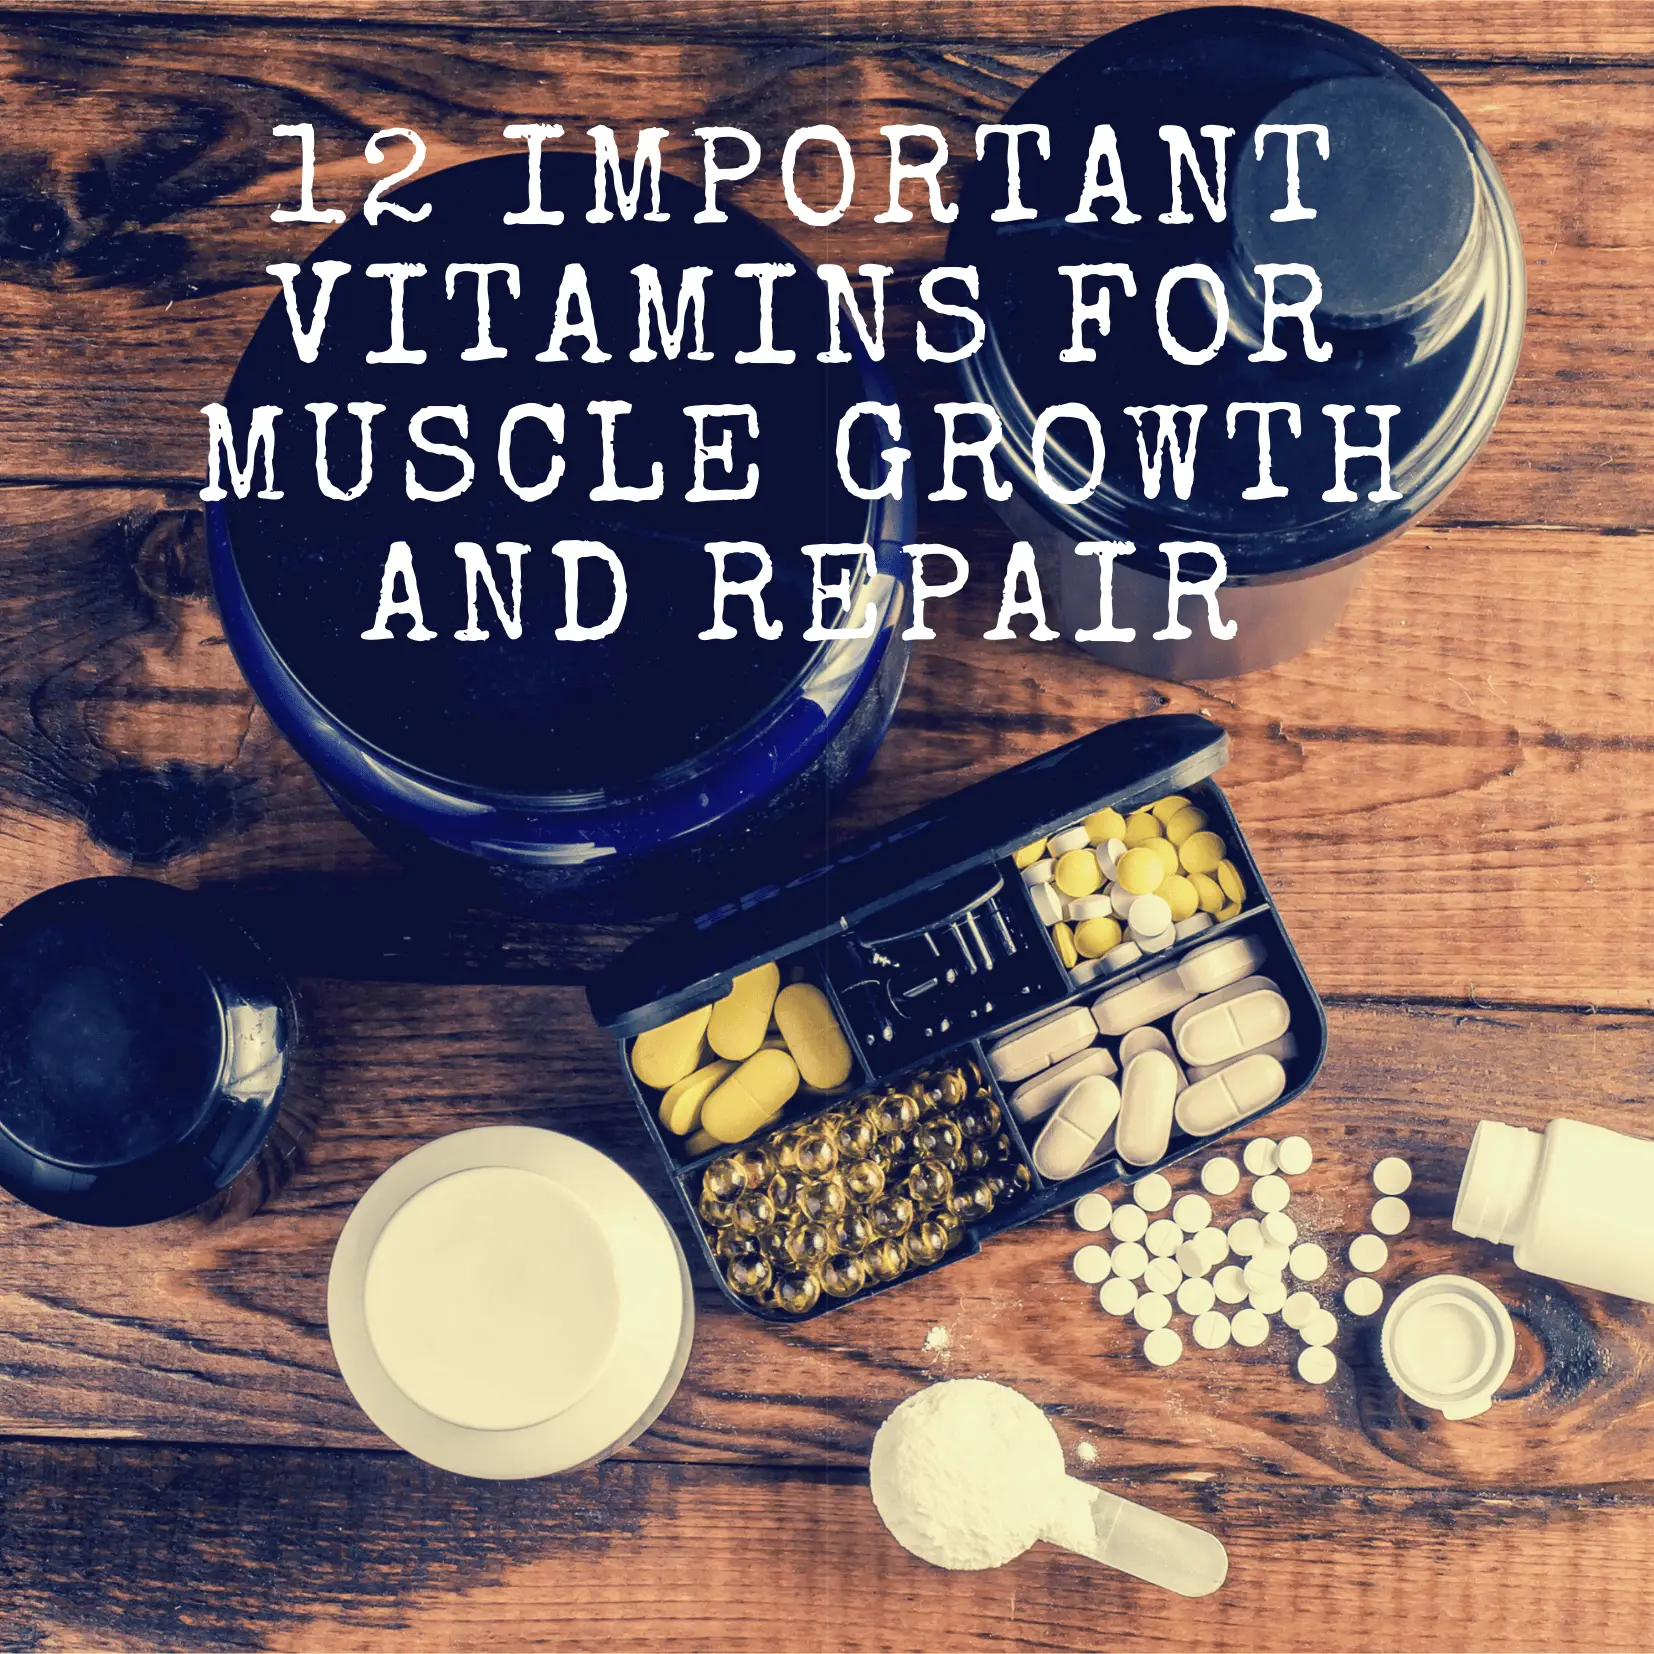 12 Important Vitamins For Muscle Growth And Repair